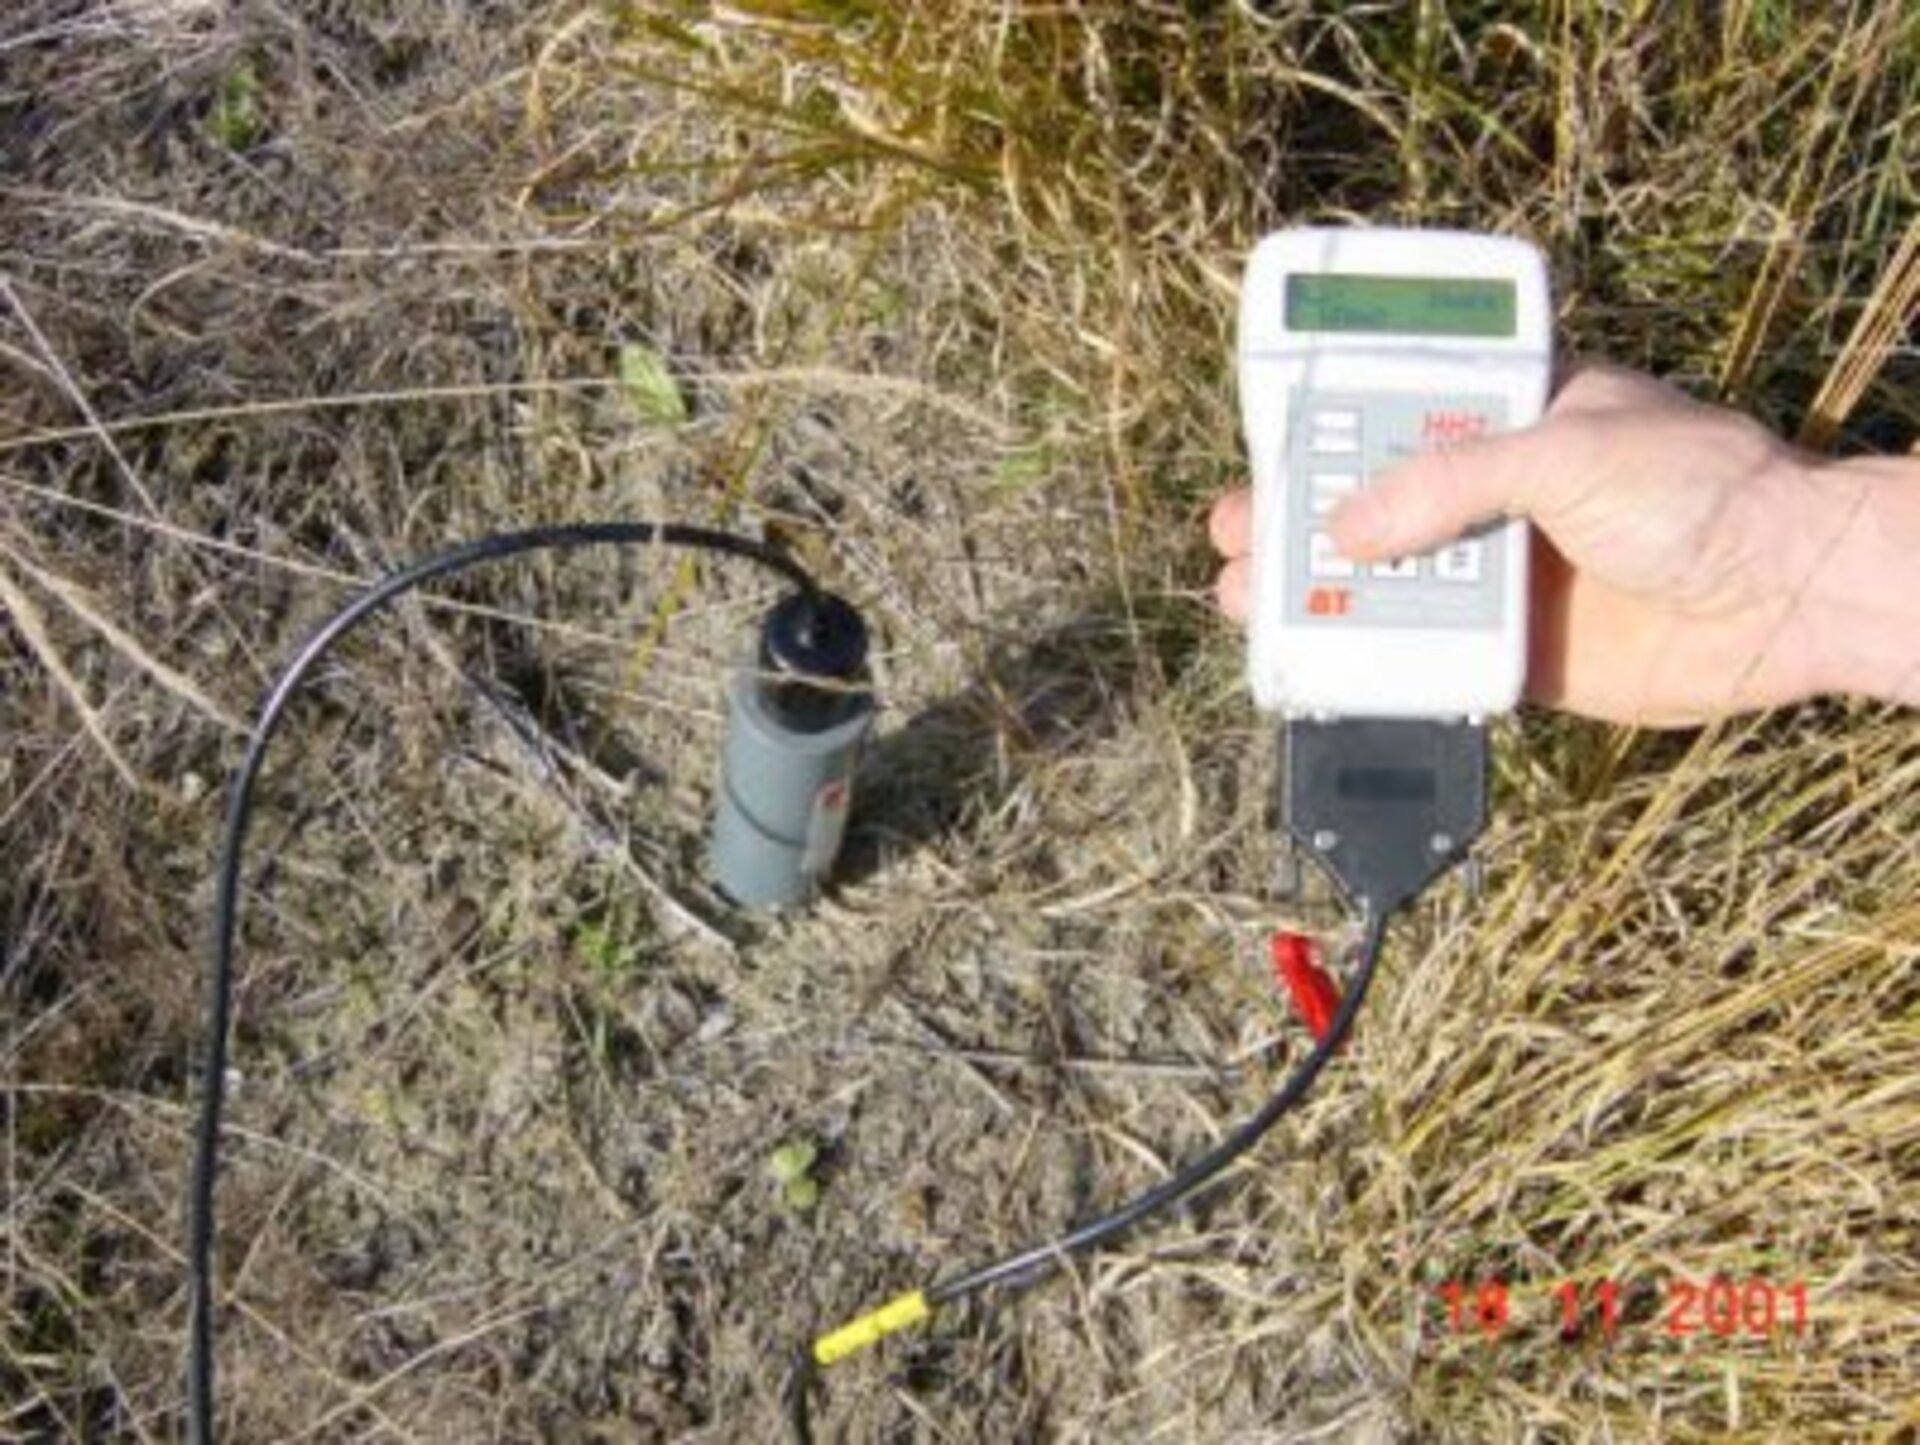 Soil moisture measurements made concurrently with the overflights.